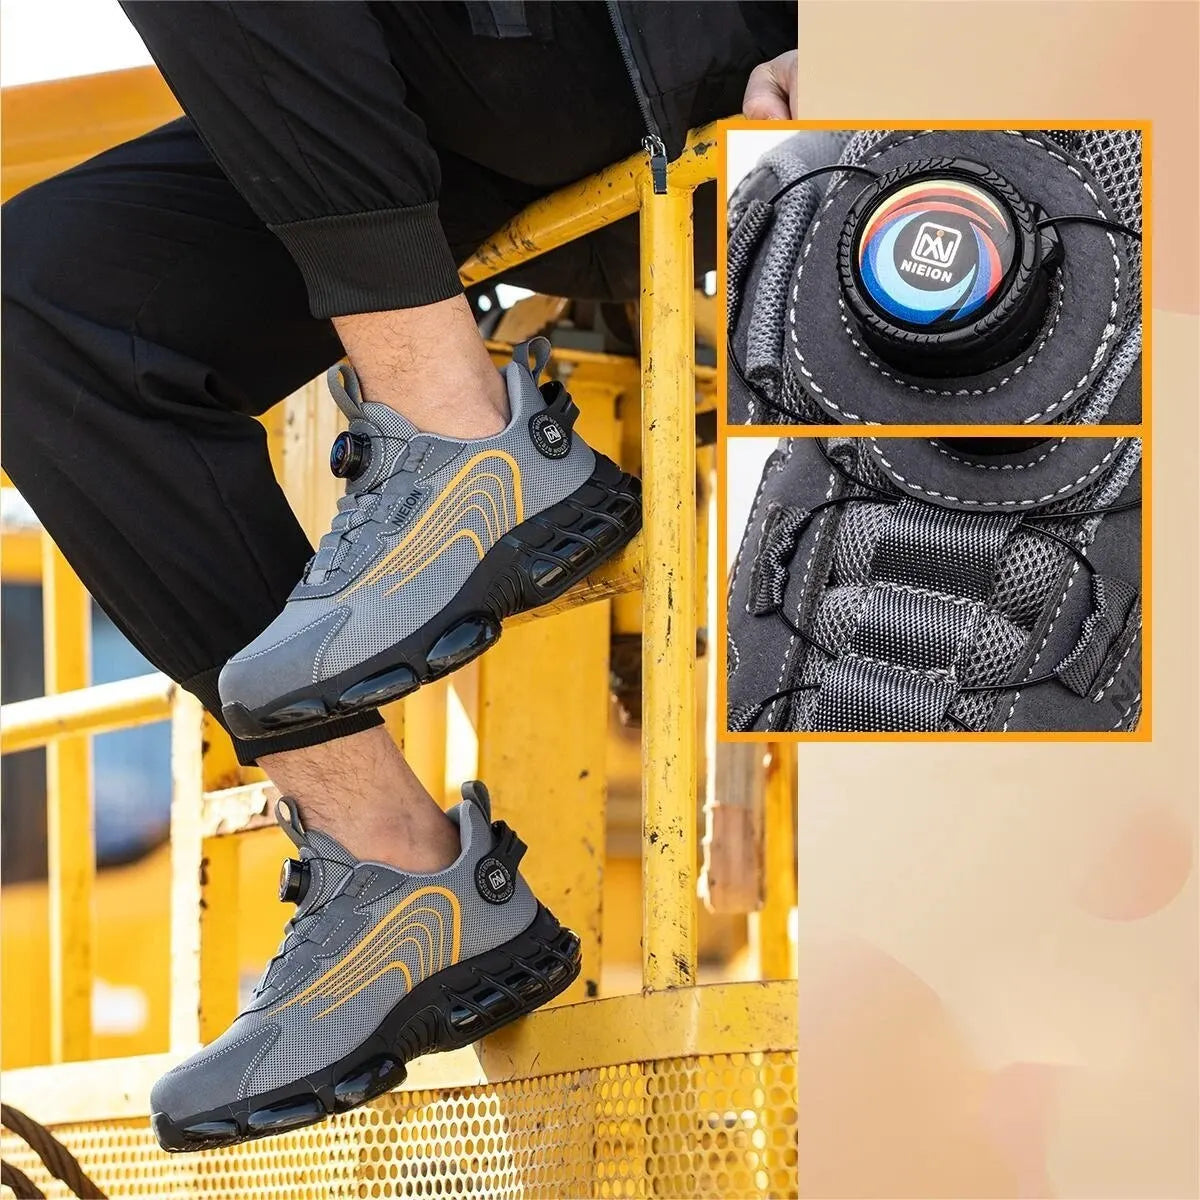 Black & Grey Rotary Buckle Work Sneakers Protective Safety Steel Toe Shoes